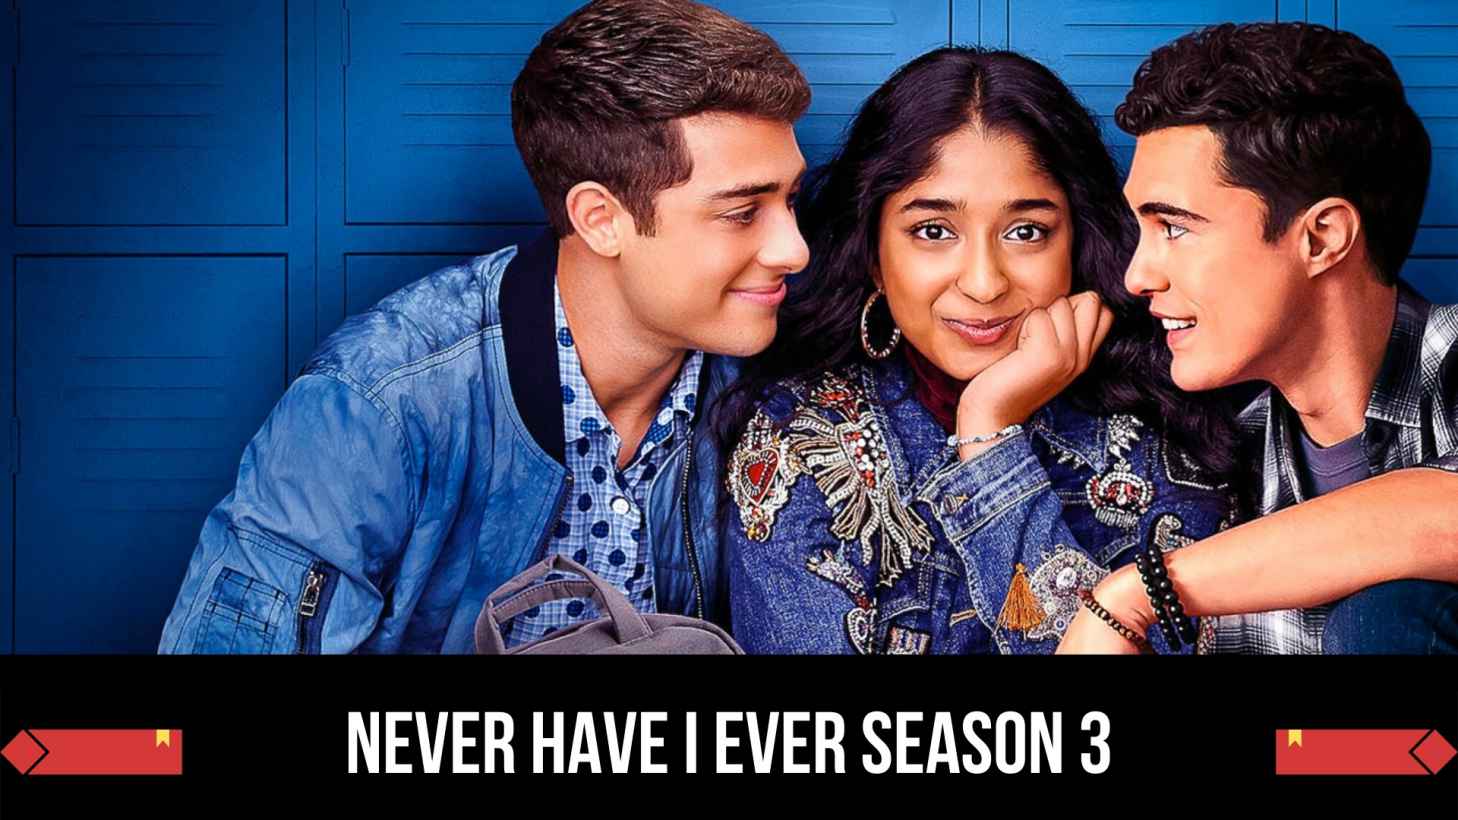 Never Have I Ever Season 3: Know Everything About New Season of Never Have I Ever!